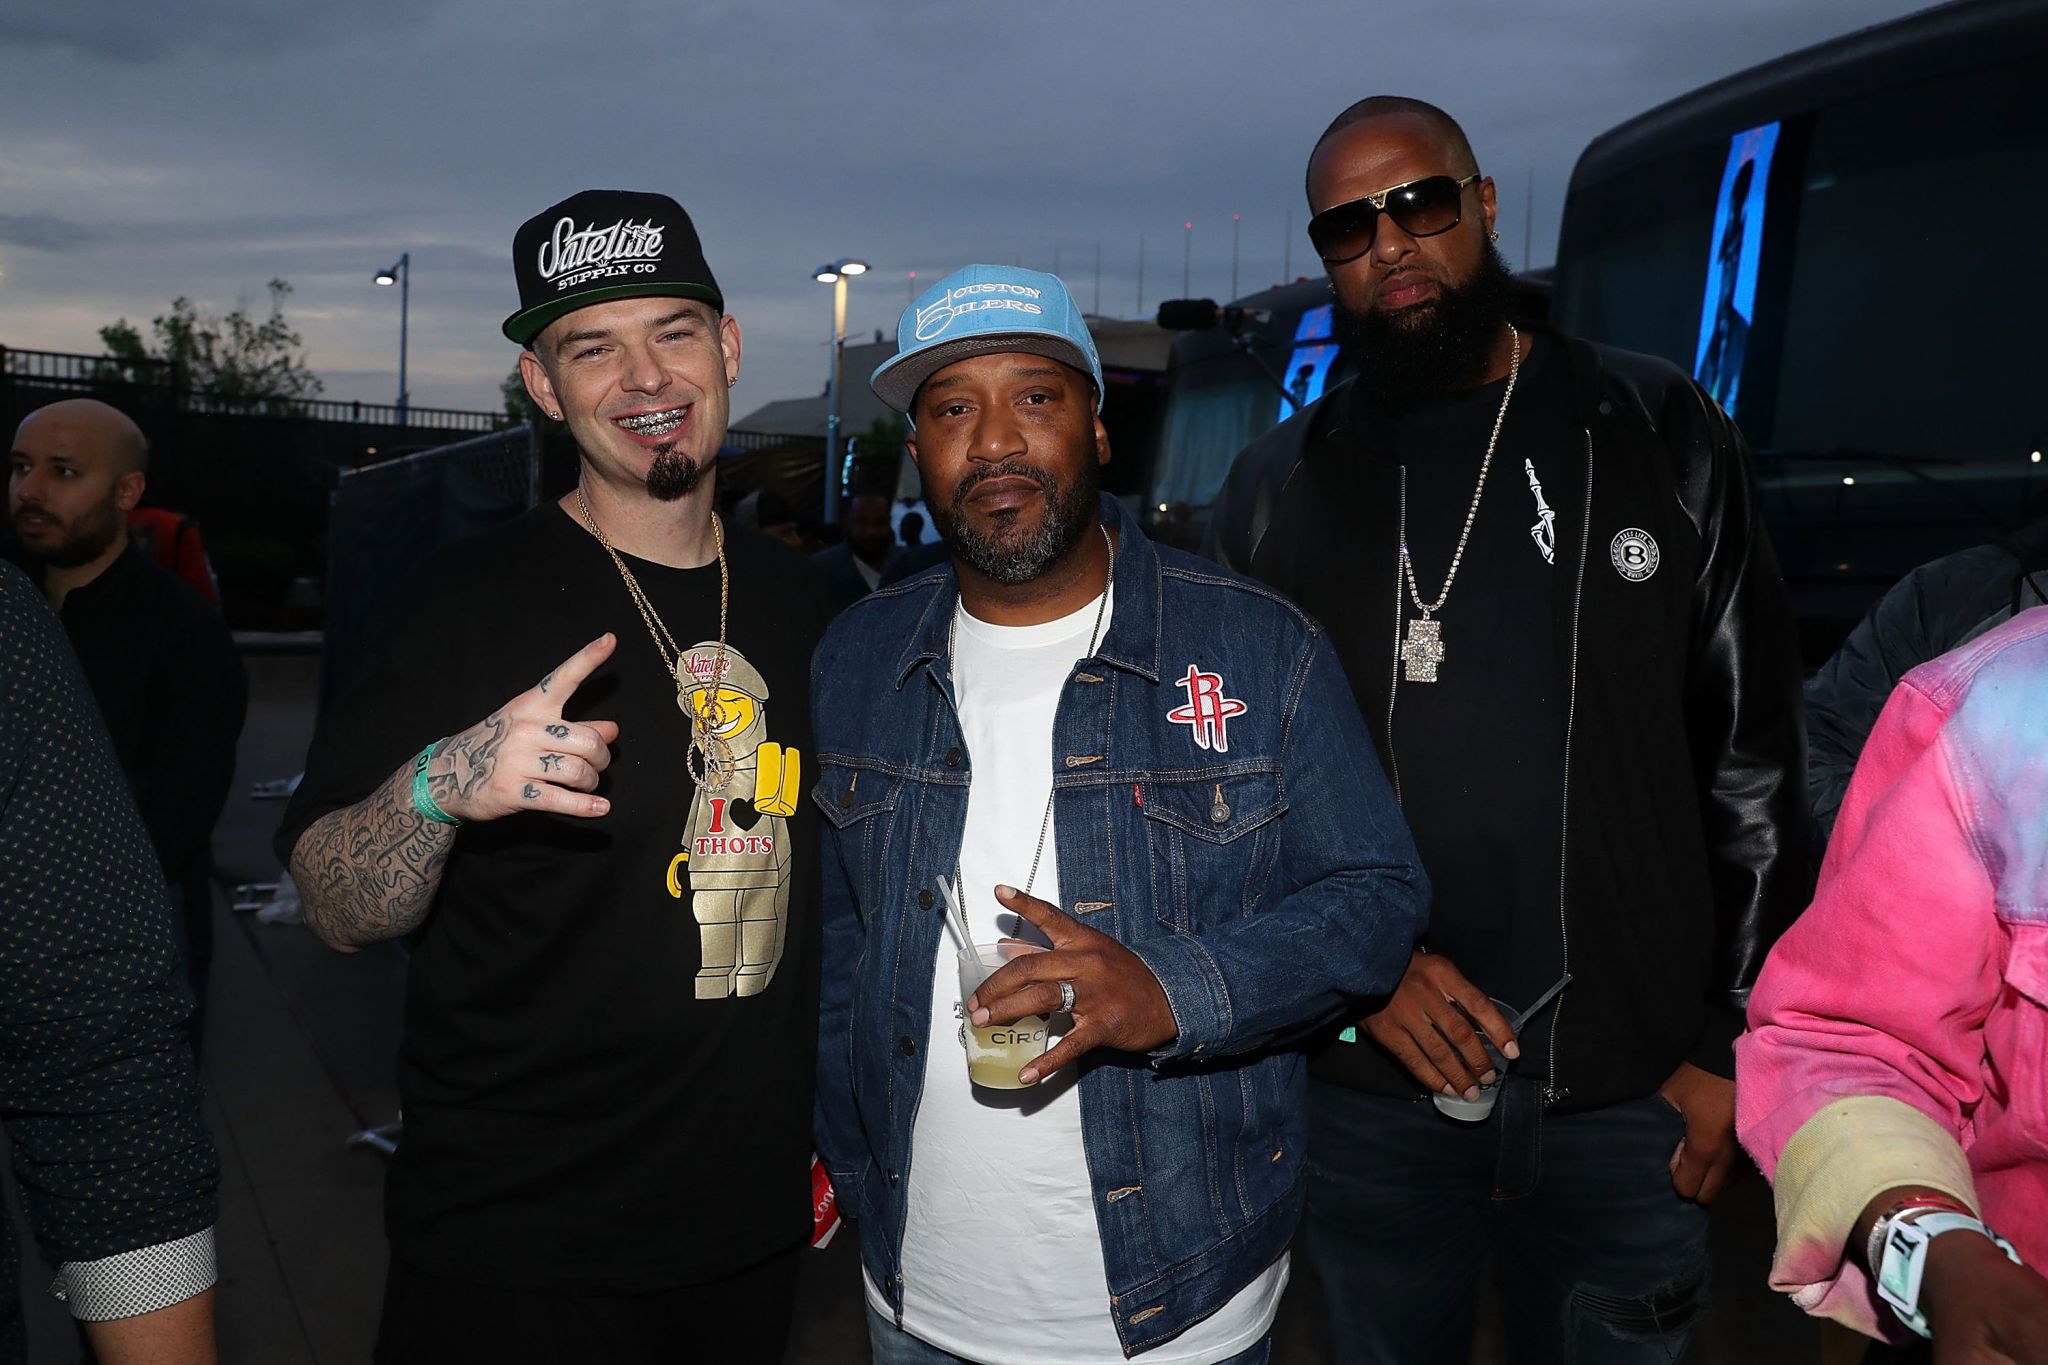 Watch rapper Bun B sum up the atmosphere in Houston at World